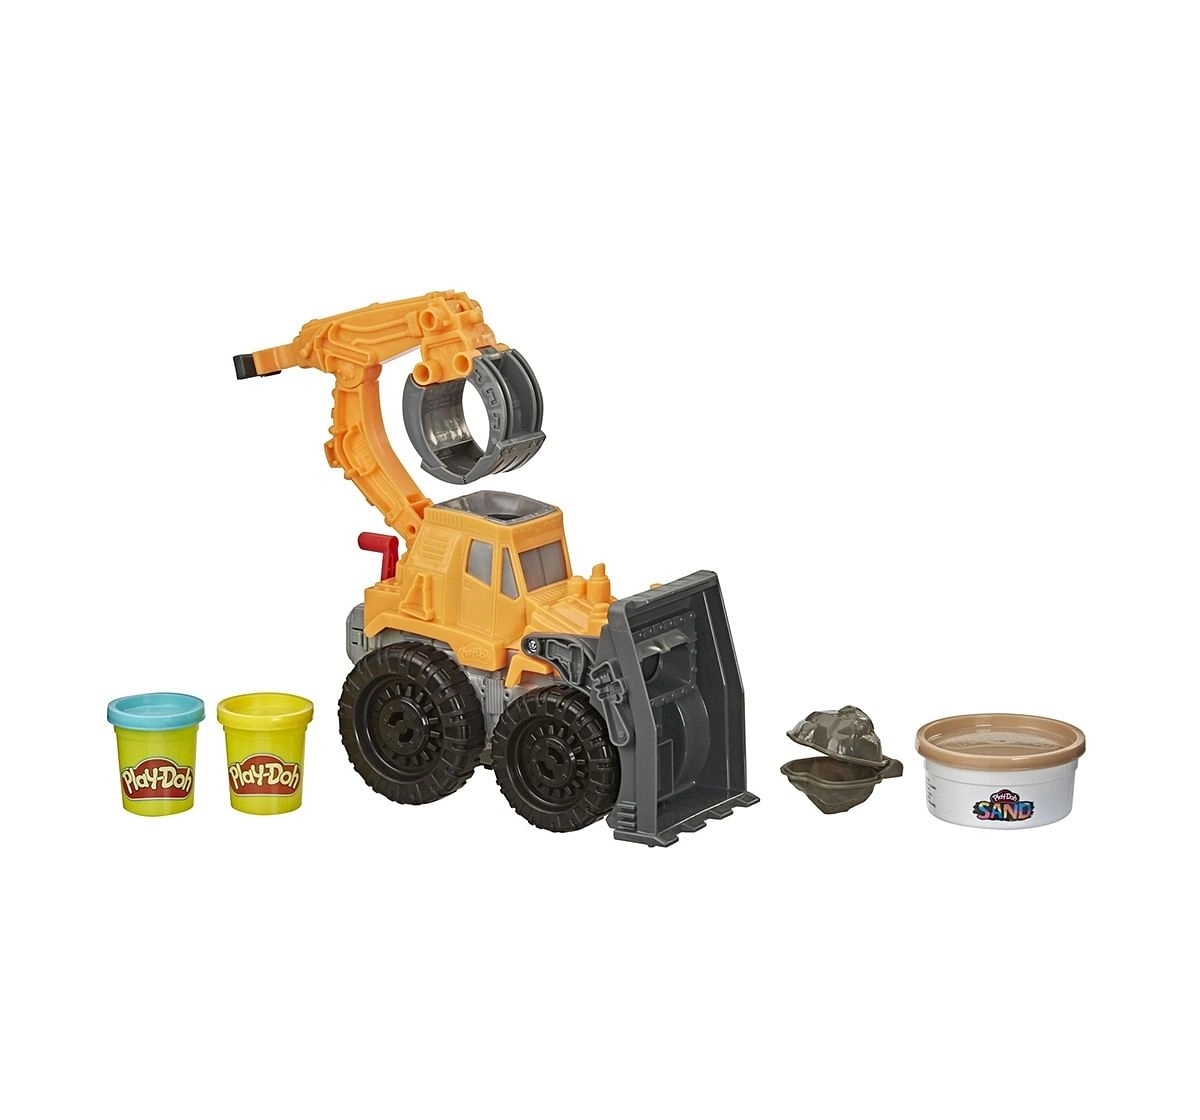 Play-Doh Wheels Front Loader Toy Truck for Kids Ages 3 and Up with Non-Toxic Play-Doh Sand Compound and Classic Play-Doh Compound in 2 Colors Clay & Dough for Kids age 3Y+ 